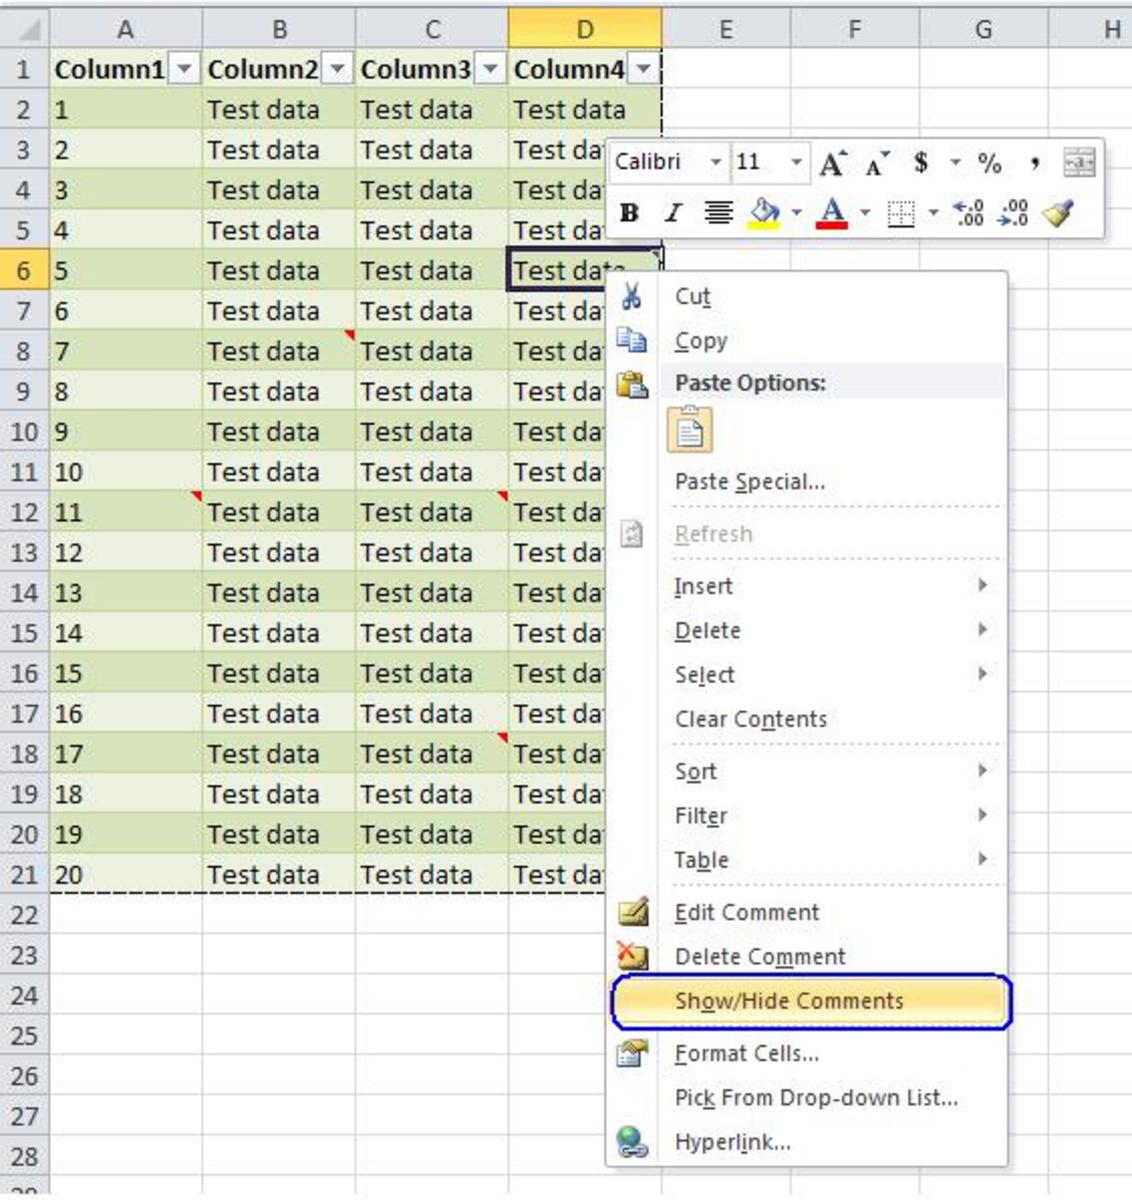 tutorial-ms-excel-how-to-showhideinsert-comments-to-a-cell-in-an-excel-sheet